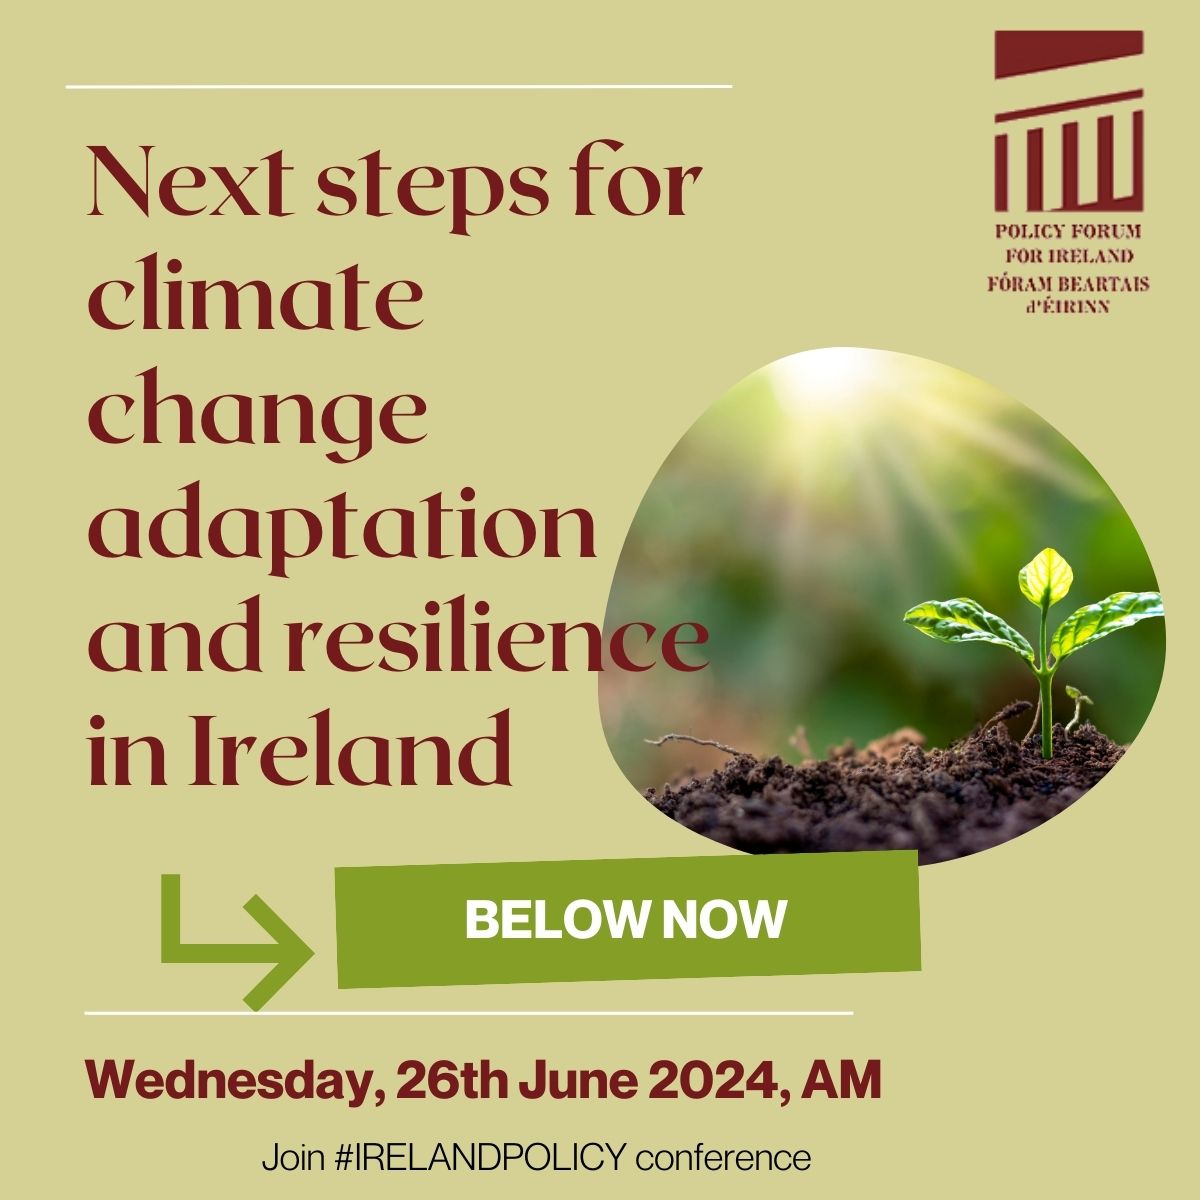 Policy Forum for Ireland are hosting an online conference on the 26th June discussing Next steps for climate change adaptation and resilience in Ireland. Our speaker line up includes @Entirl @KPMG_Ireland @ucddublin @TheBarofIreland. More information: westminsterforumprojects.co.uk/conference/PFF…